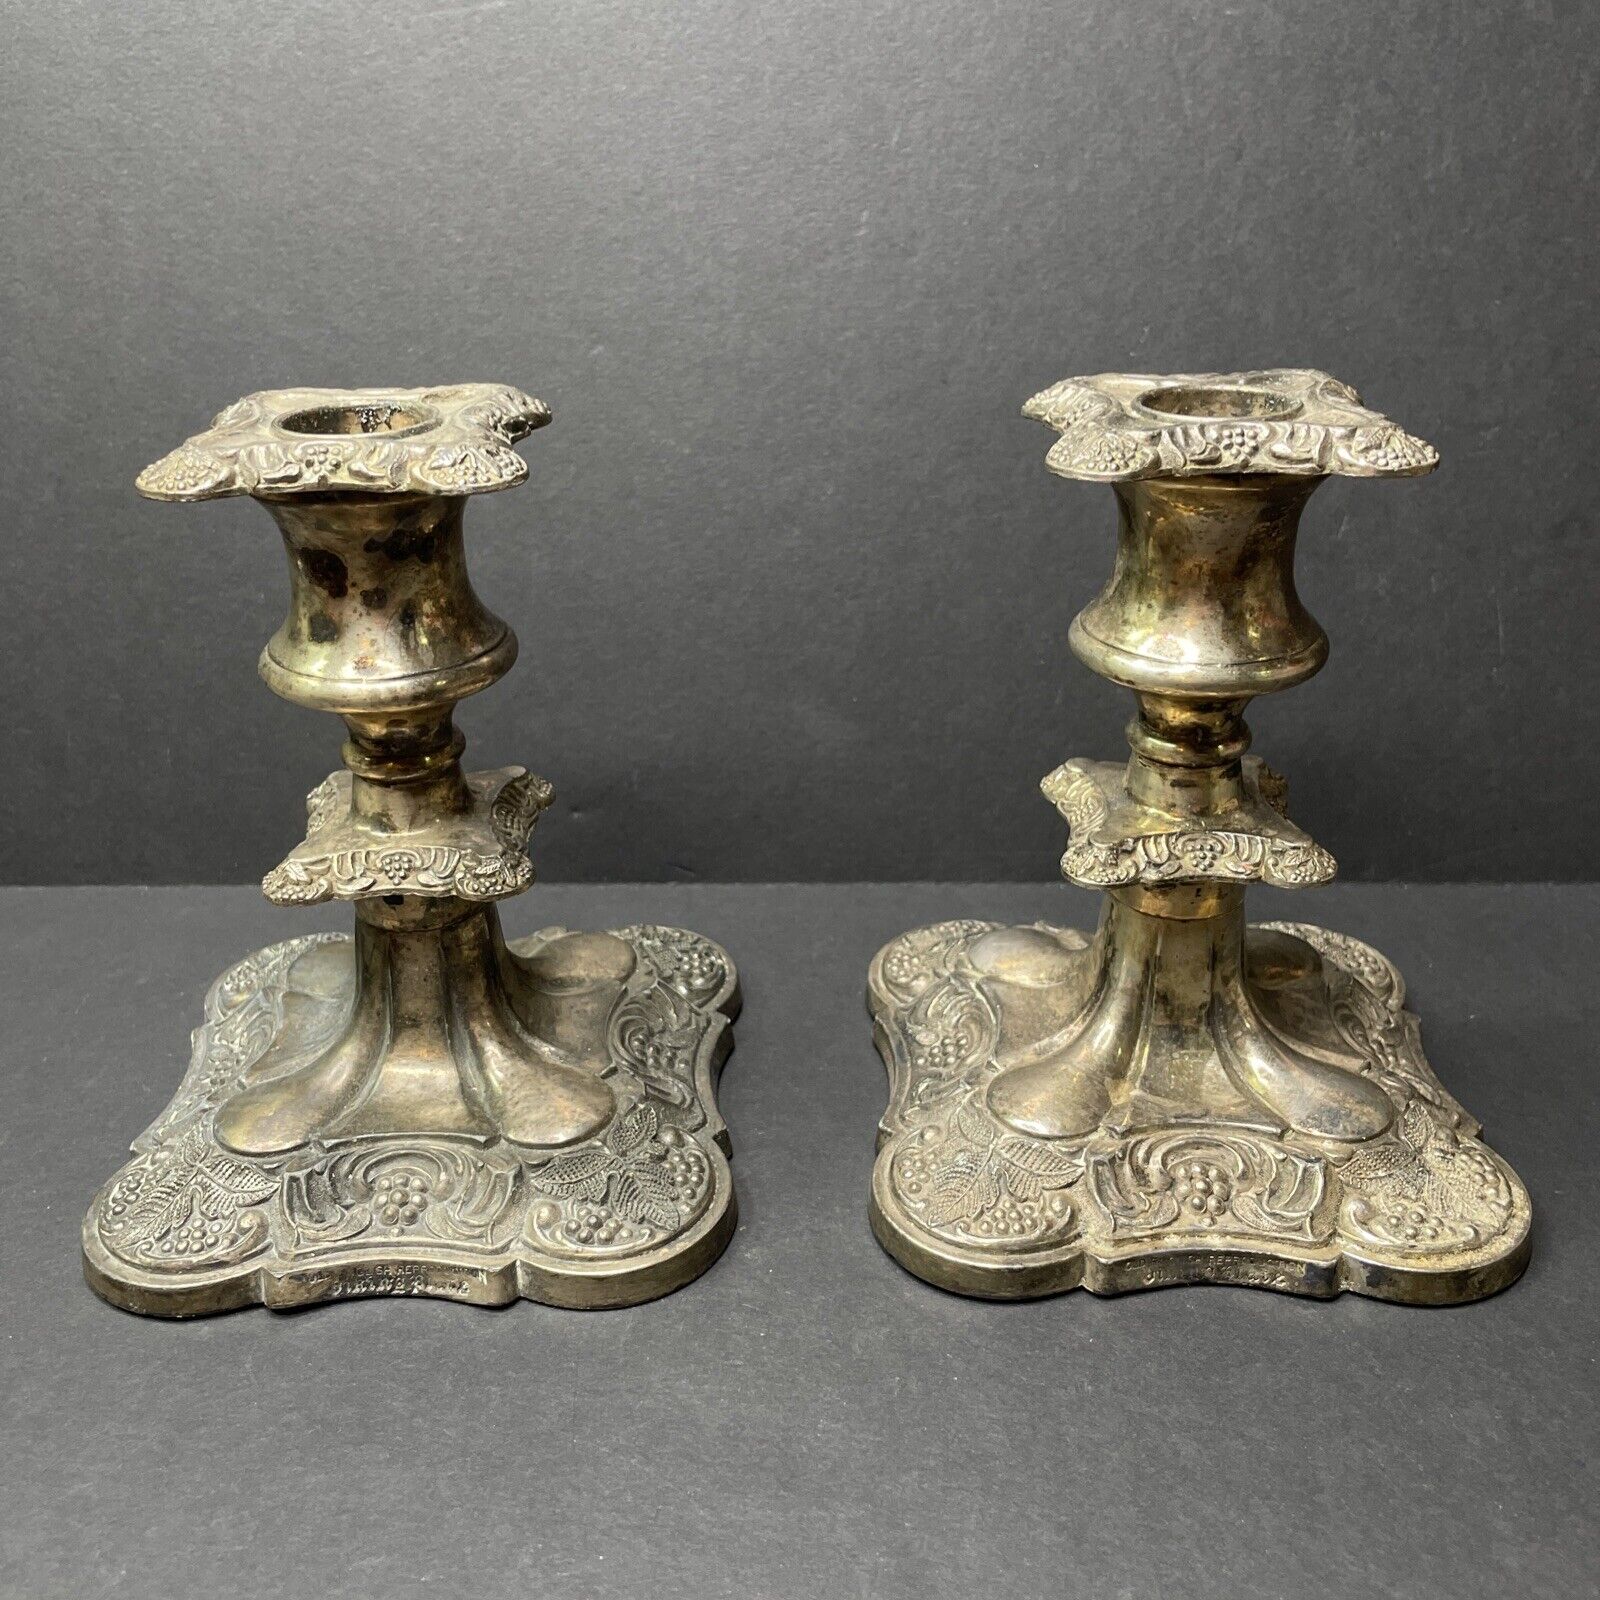 2 Vintage 1950s Viking Silver Plated Candle Sticks Candlesticks Candle Holders